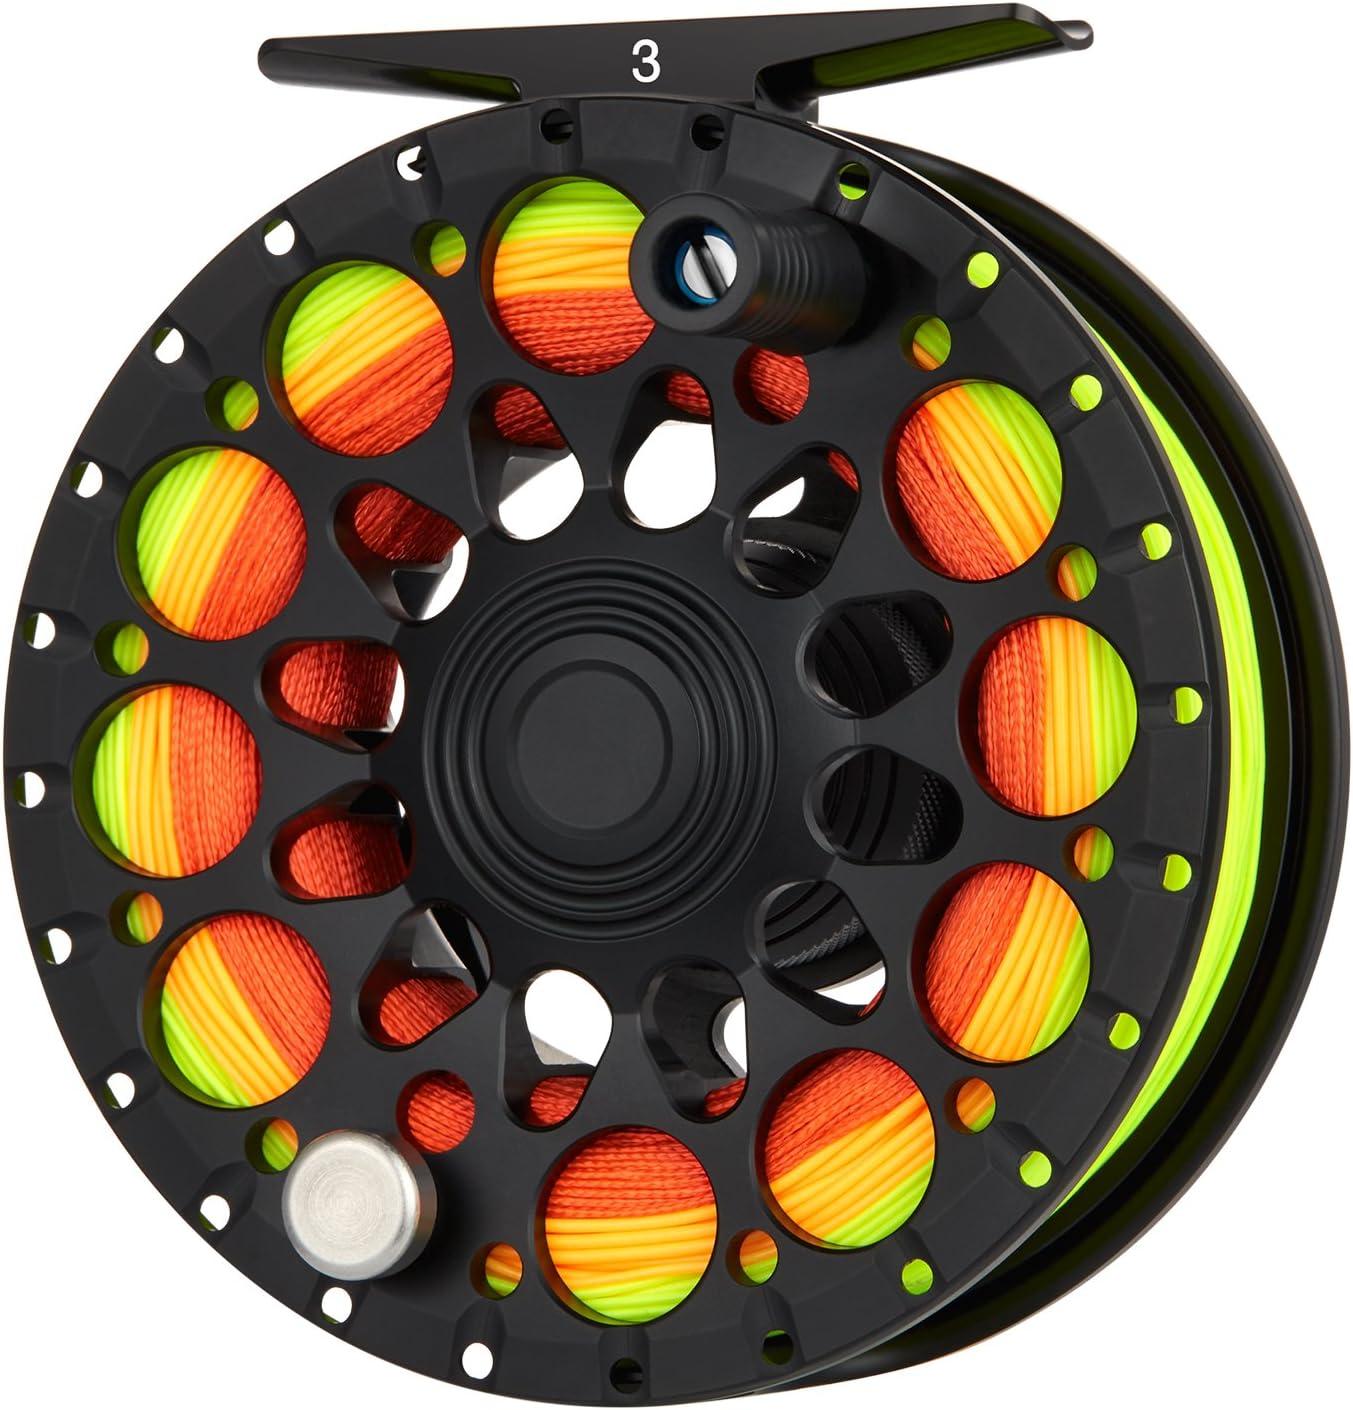  Fishing Reel, 5/6 Large Arbor Fly Reel with Release Aluminum  Alloy Fly Fishing Reel with Left or Right Hand Retrieve Conversion : Sports  & Outdoors